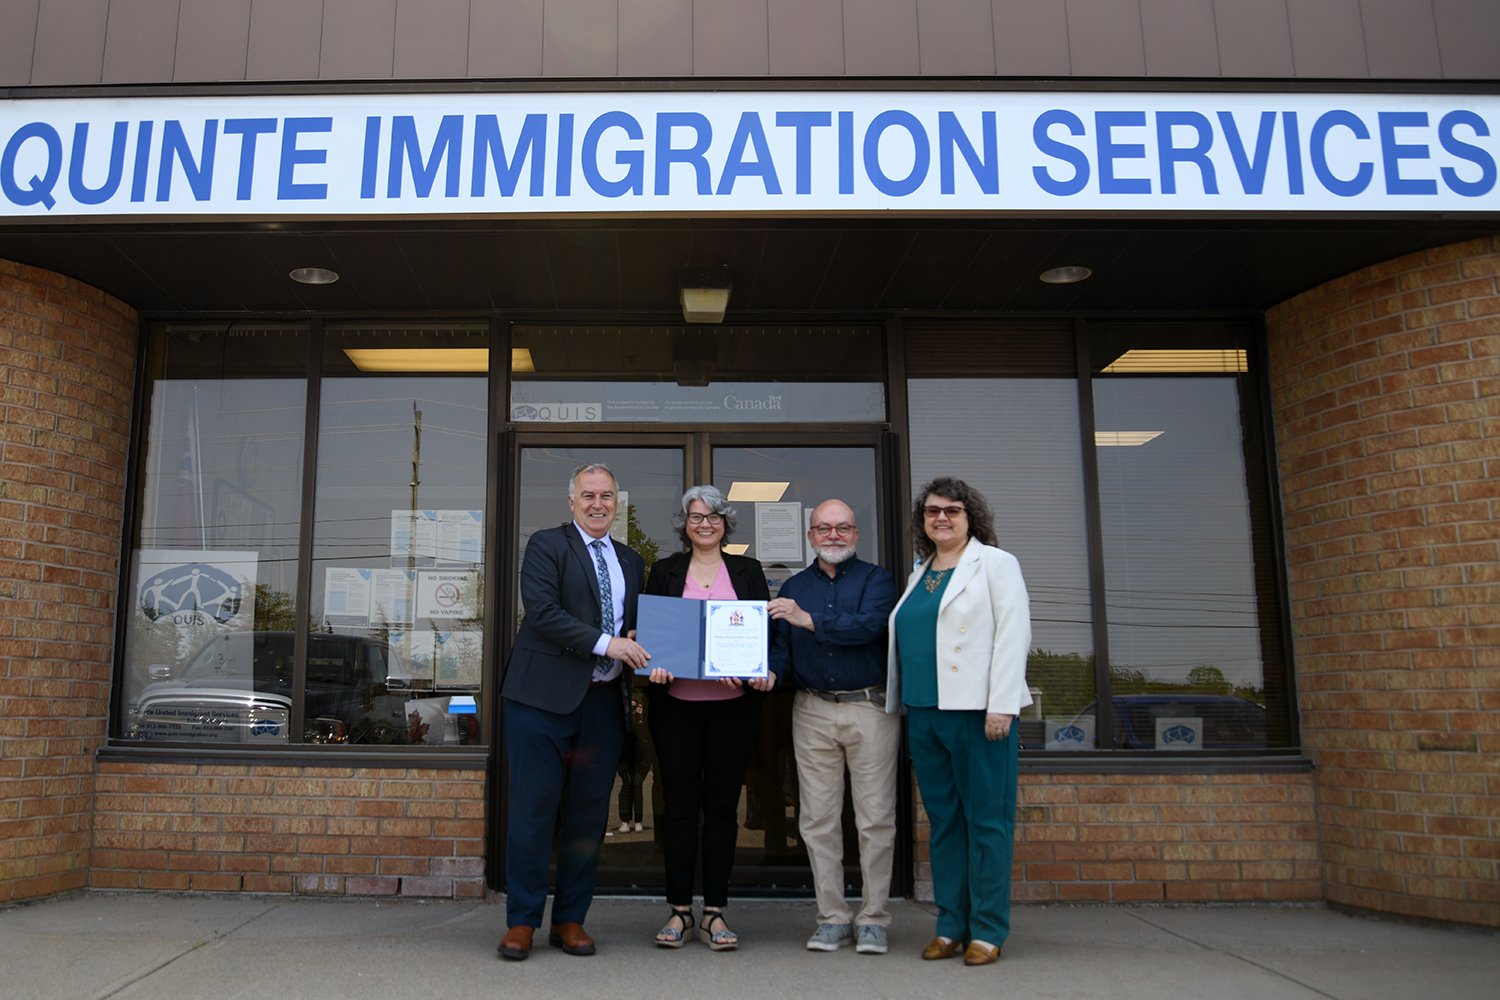 Photo with the Mayor Ellis and Quinte Immigration Services holding the sign Workplace Inclusion Charter.